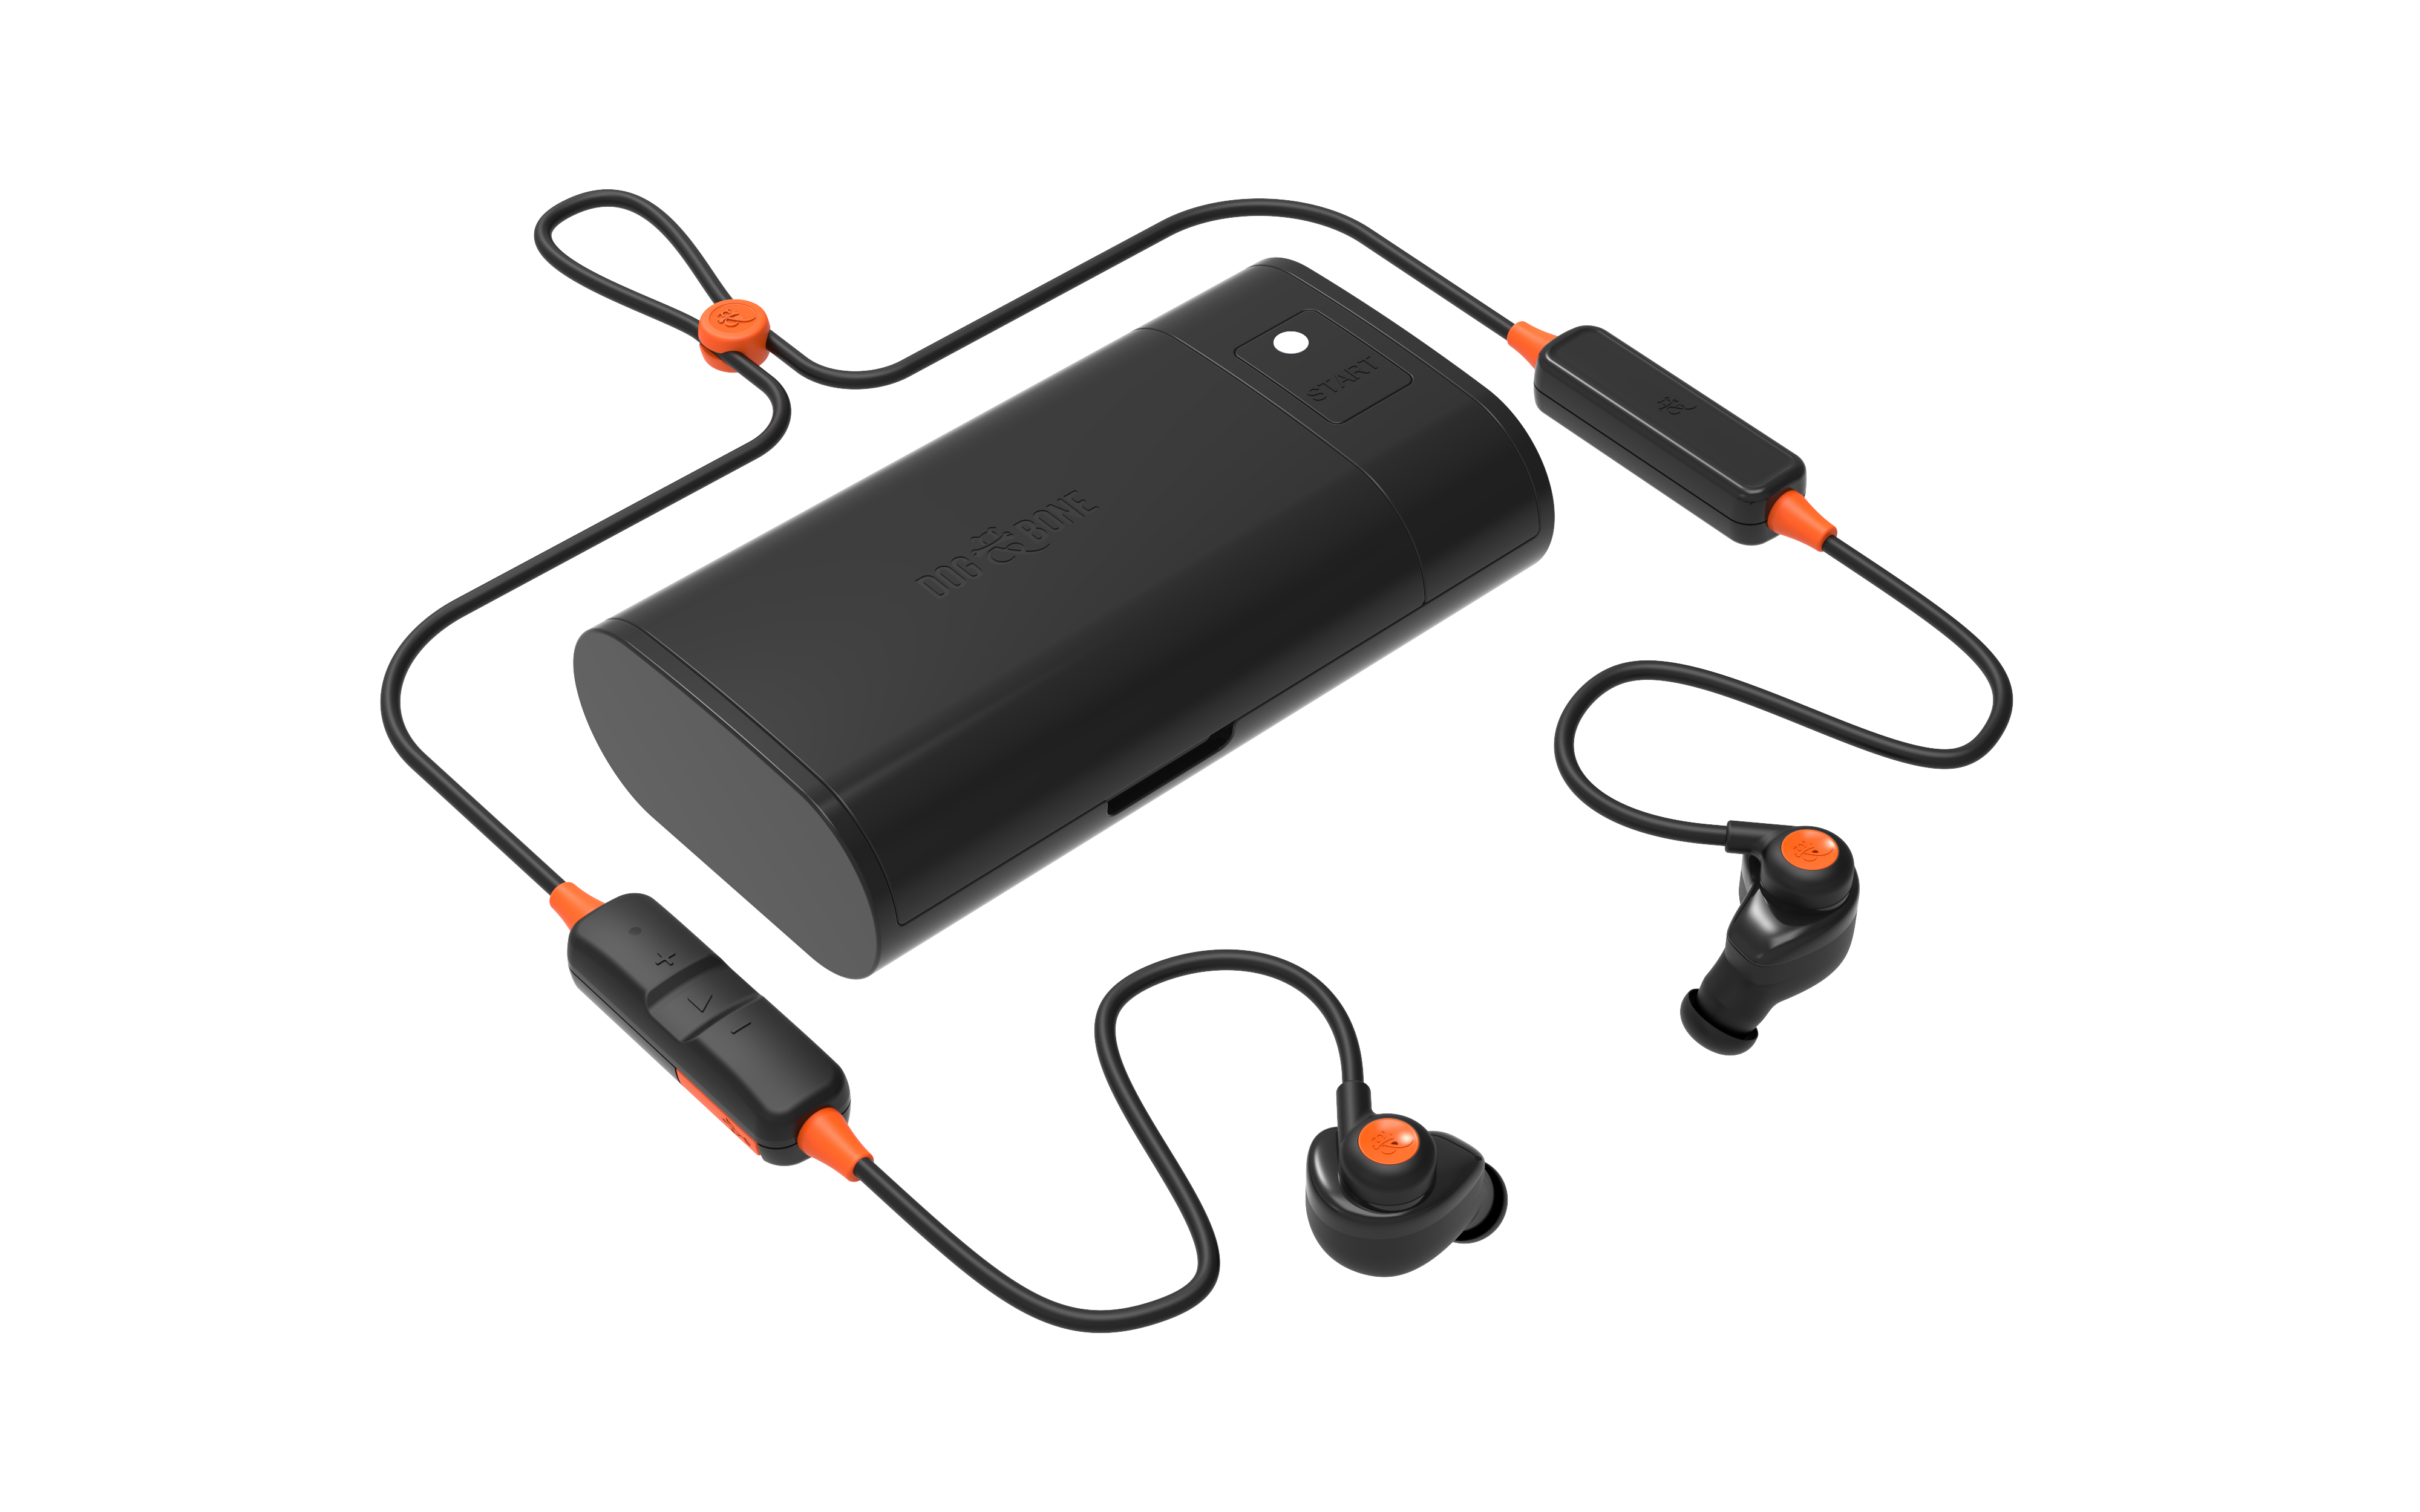 heating dock with earbuds